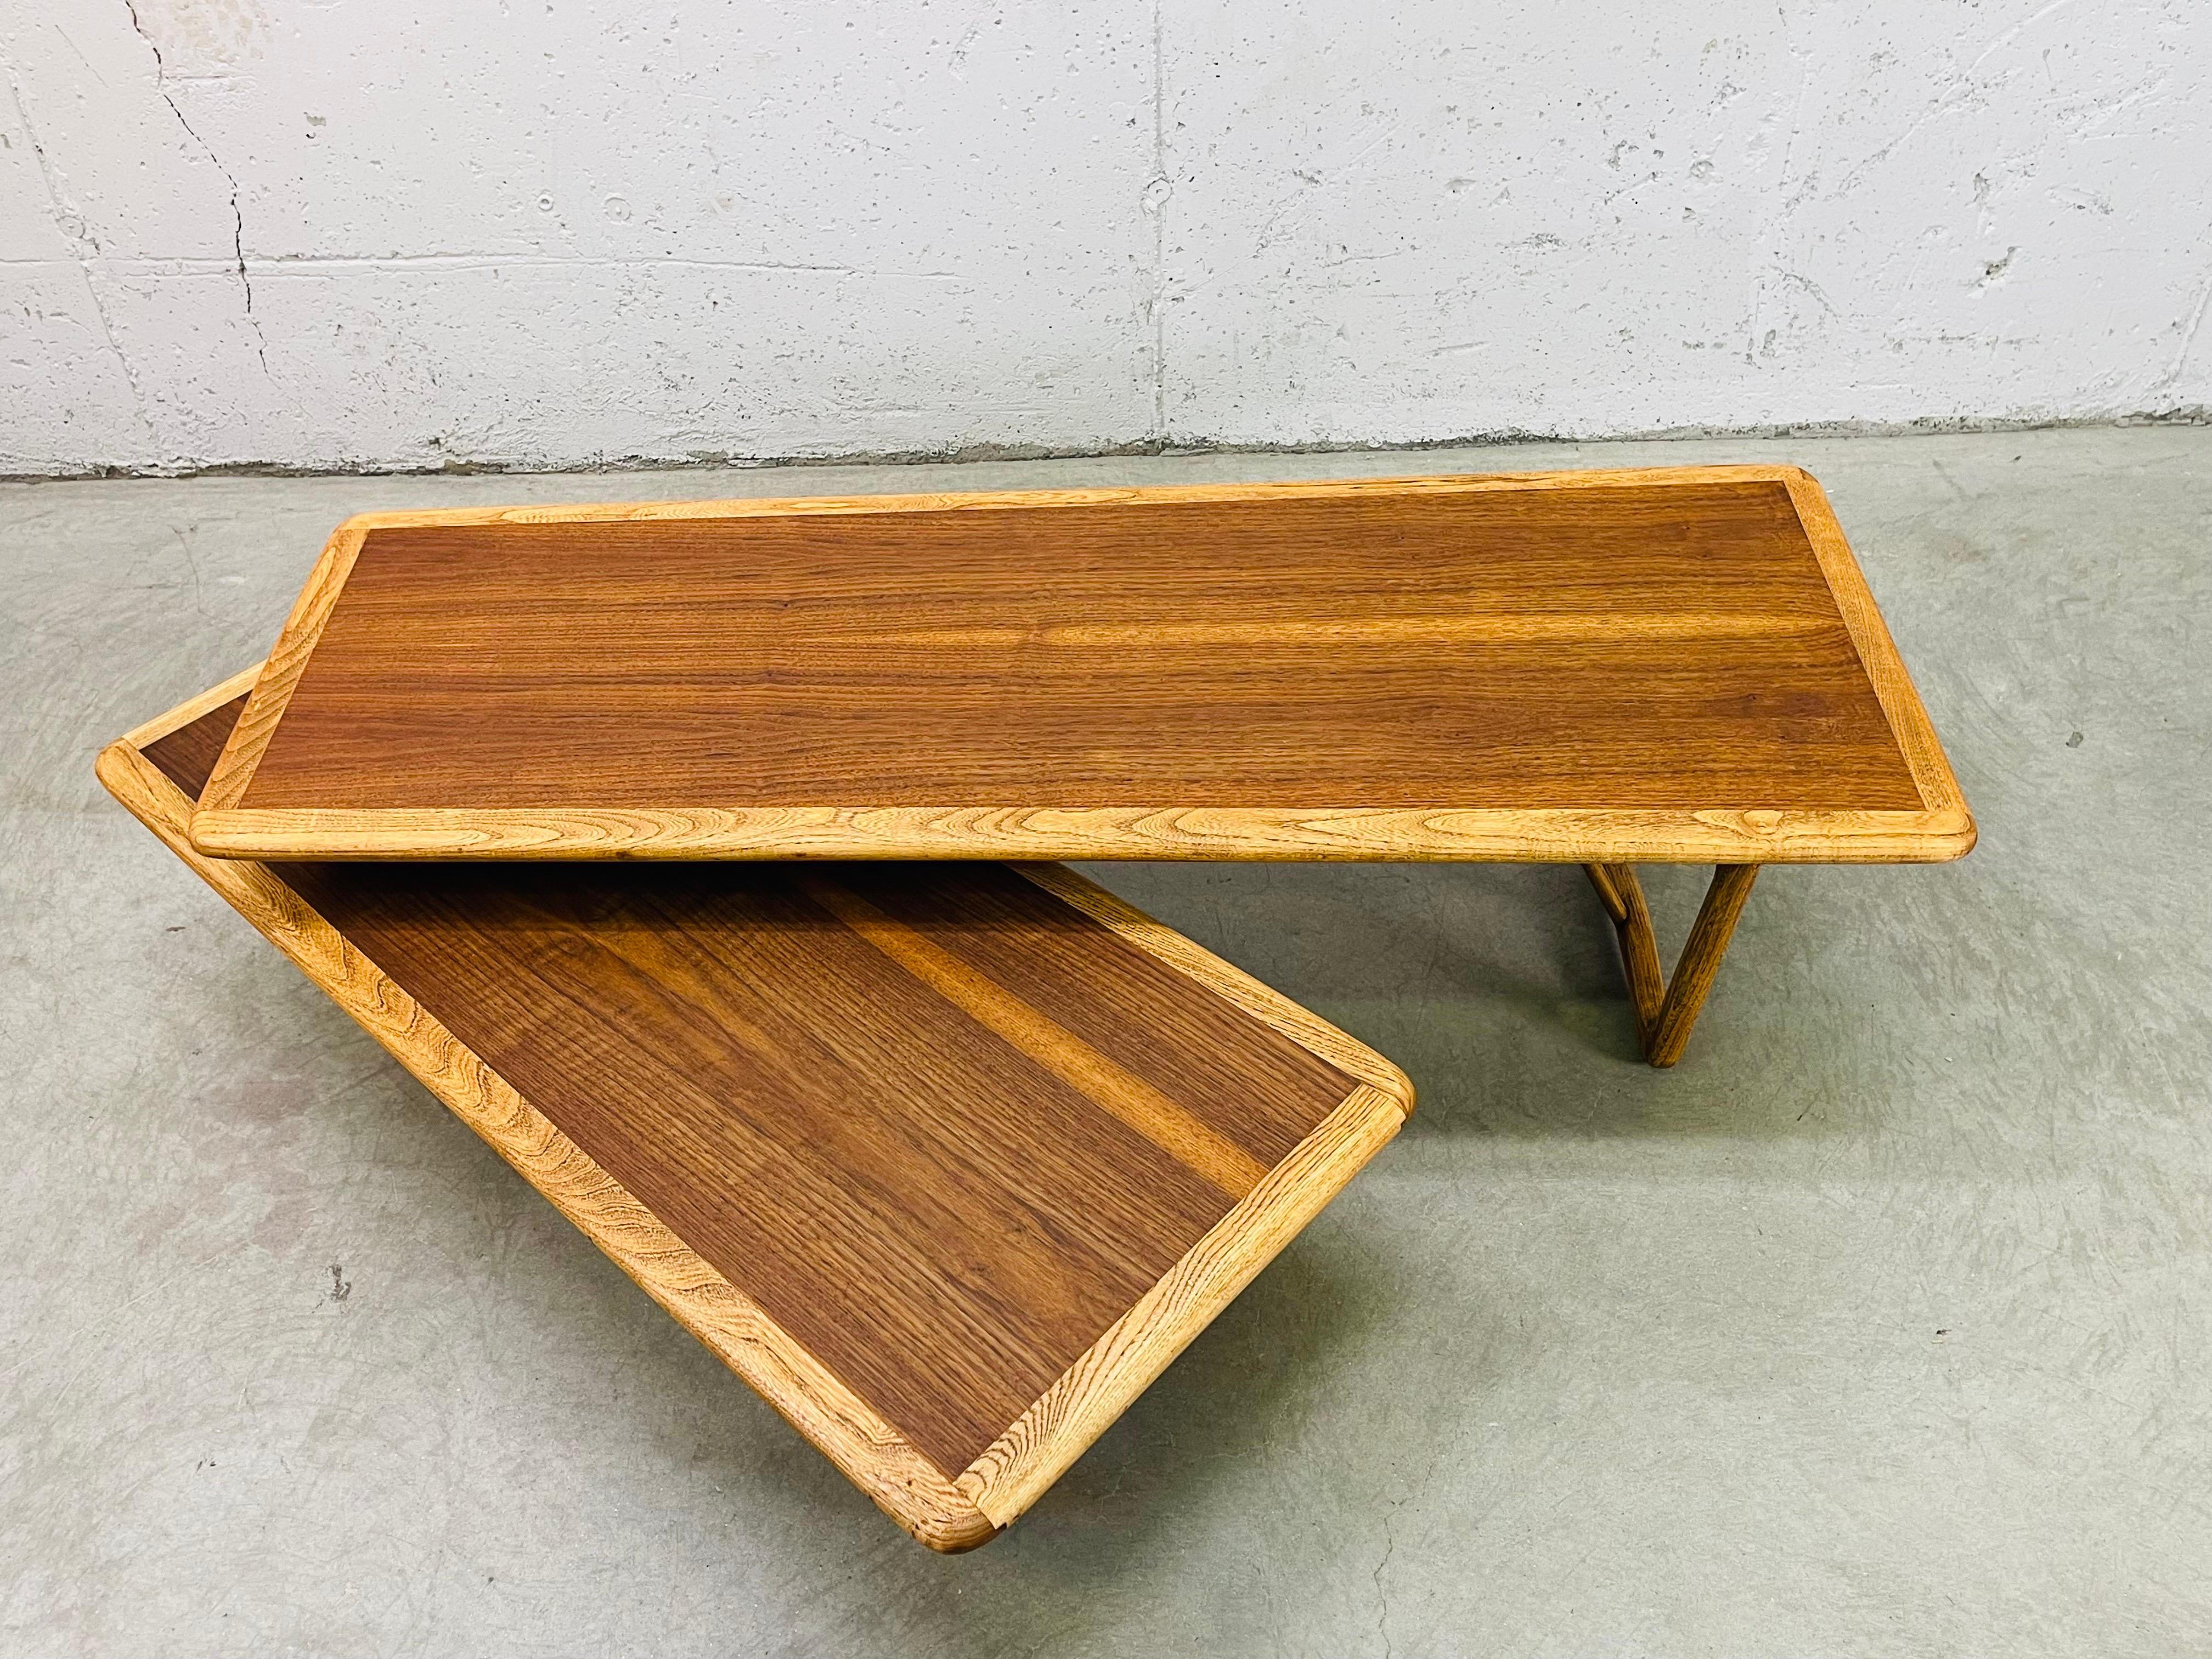 Vintage 1960s Lane Furniture solid walnut wood Switchblade style coffee table. The coffee table swivels in all directions and the extension measures 42”L x 19”W x 11”H. The table is in excellent refinished condition and is sturdy. The wood grain is